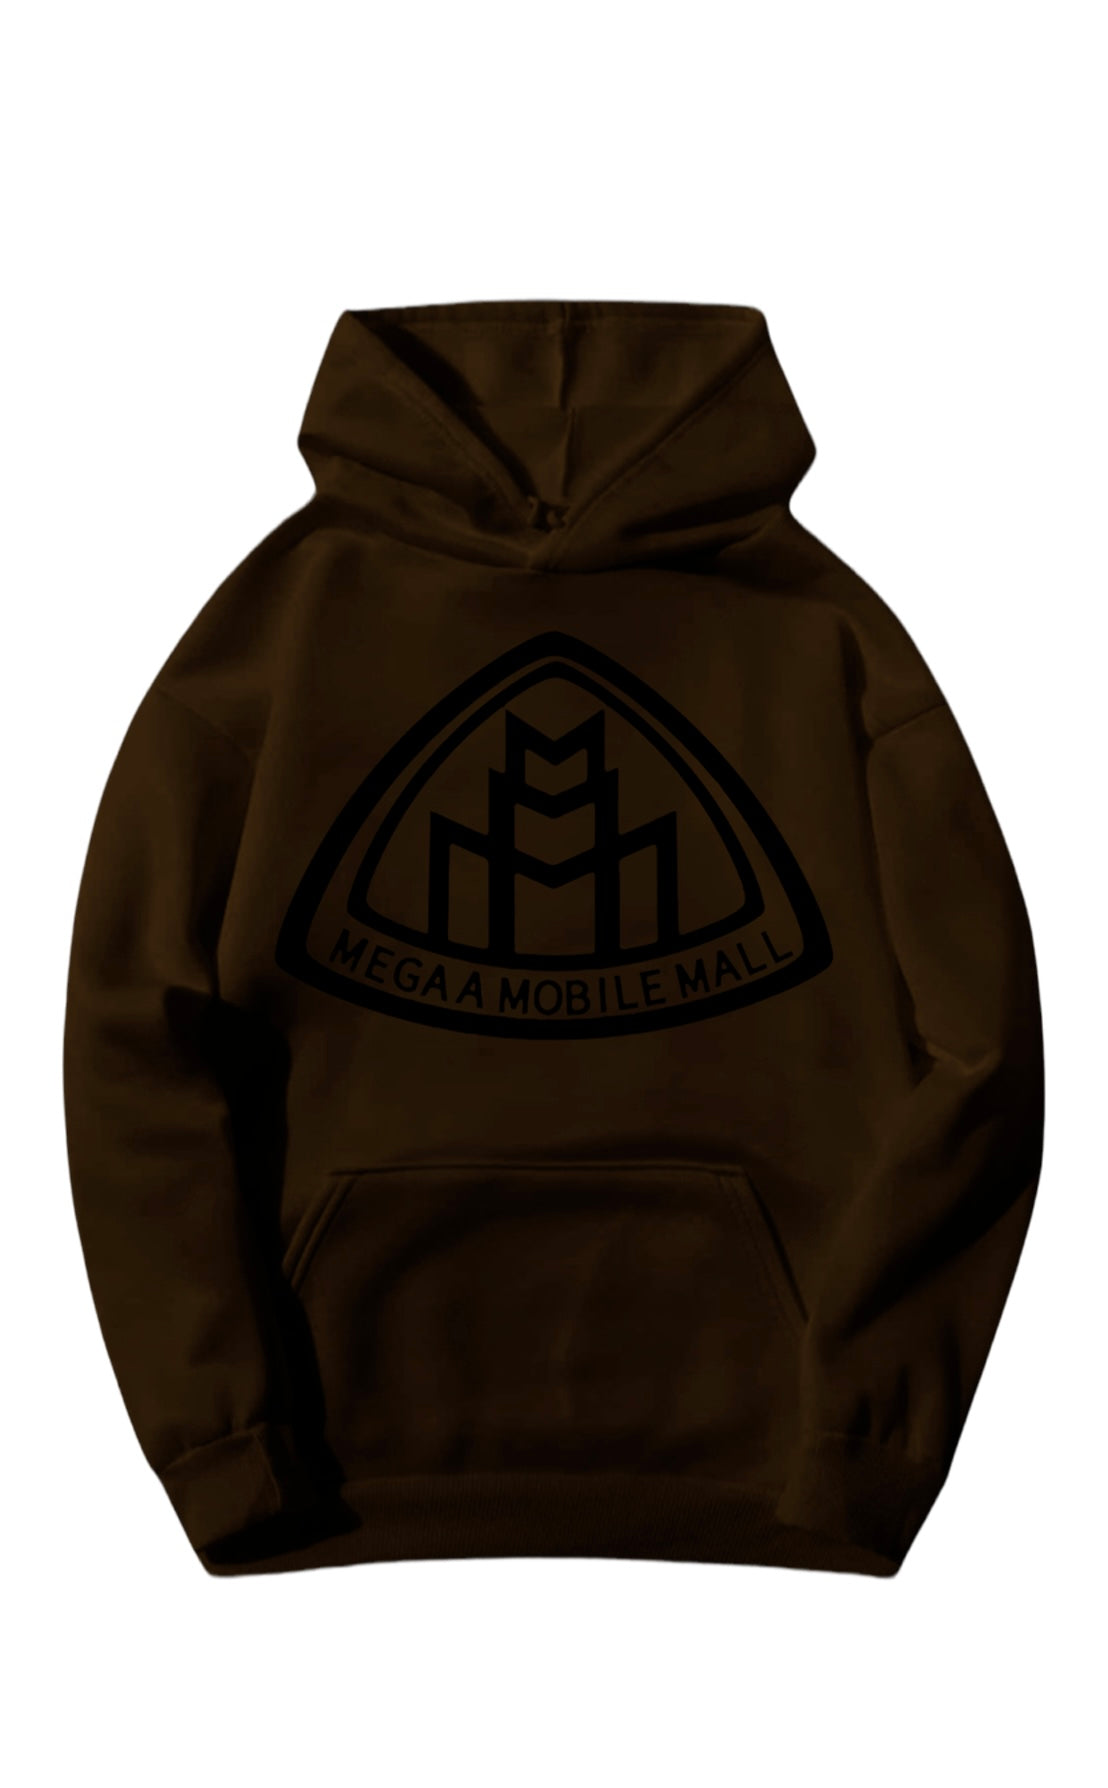 brown megaamobilemall logo Heavy Blend Fleece Hoodie with black logo